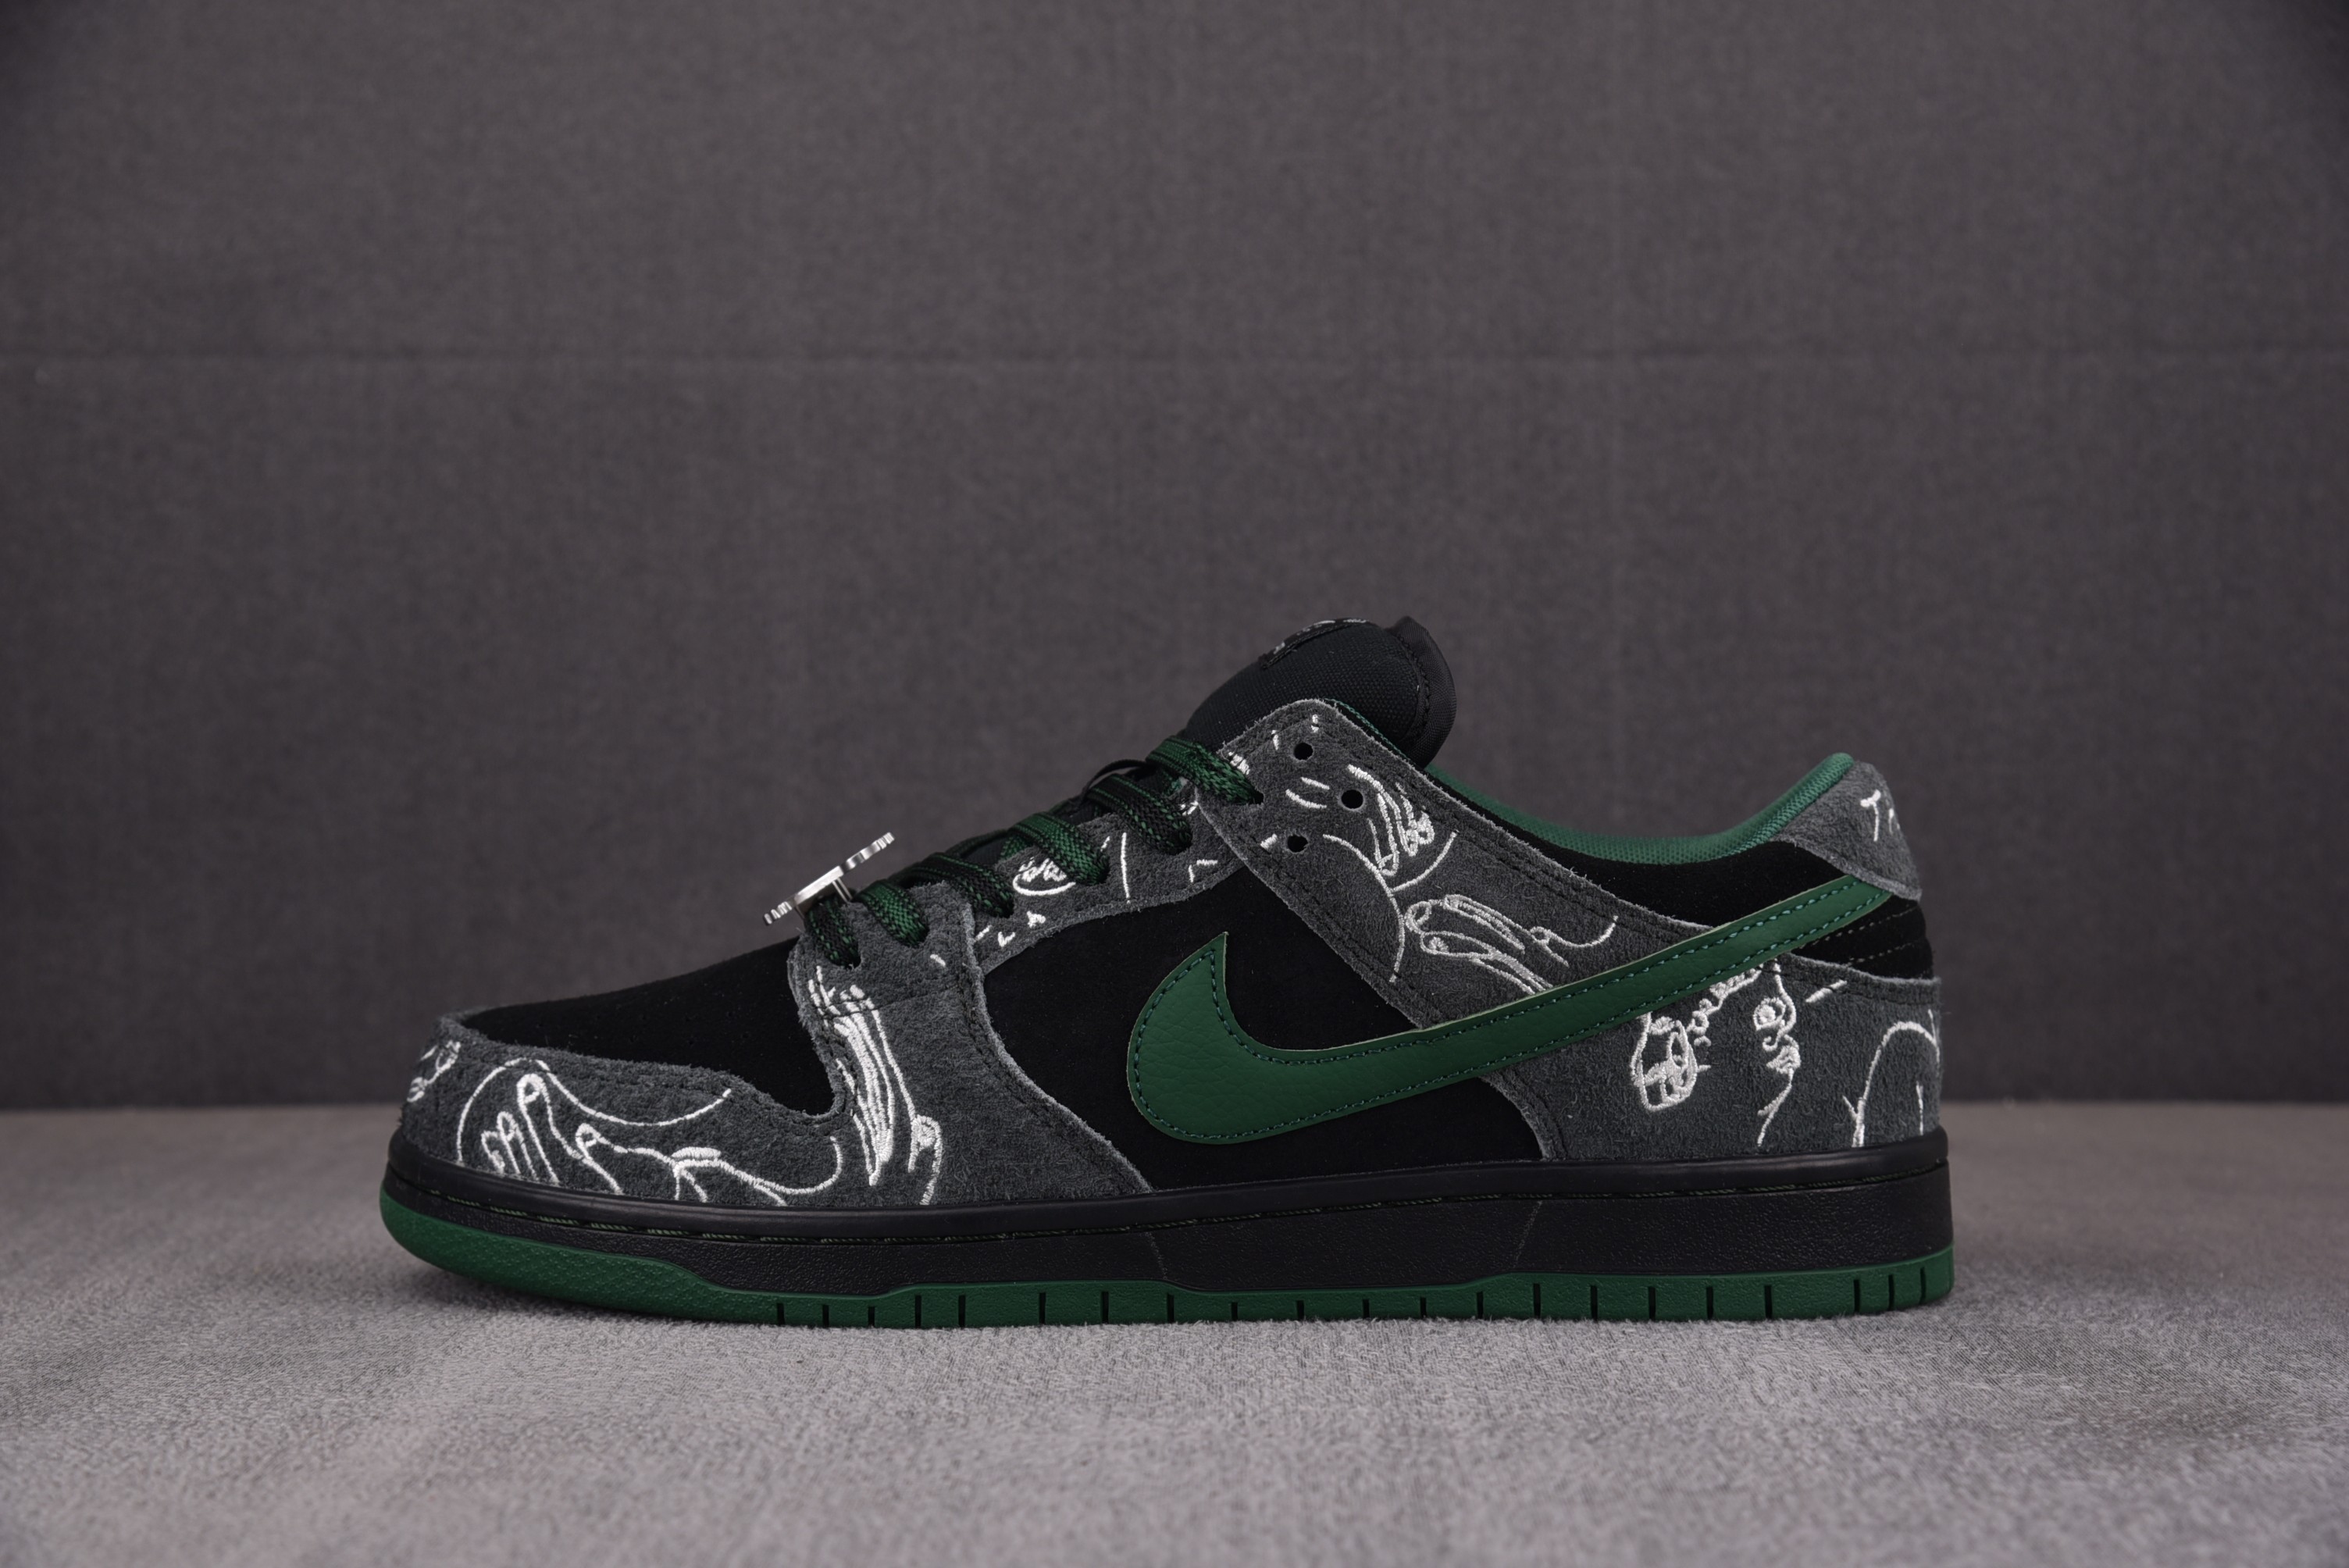 【S2】There Skateboards x NK Dunk SB 黑绿 FD7743-001